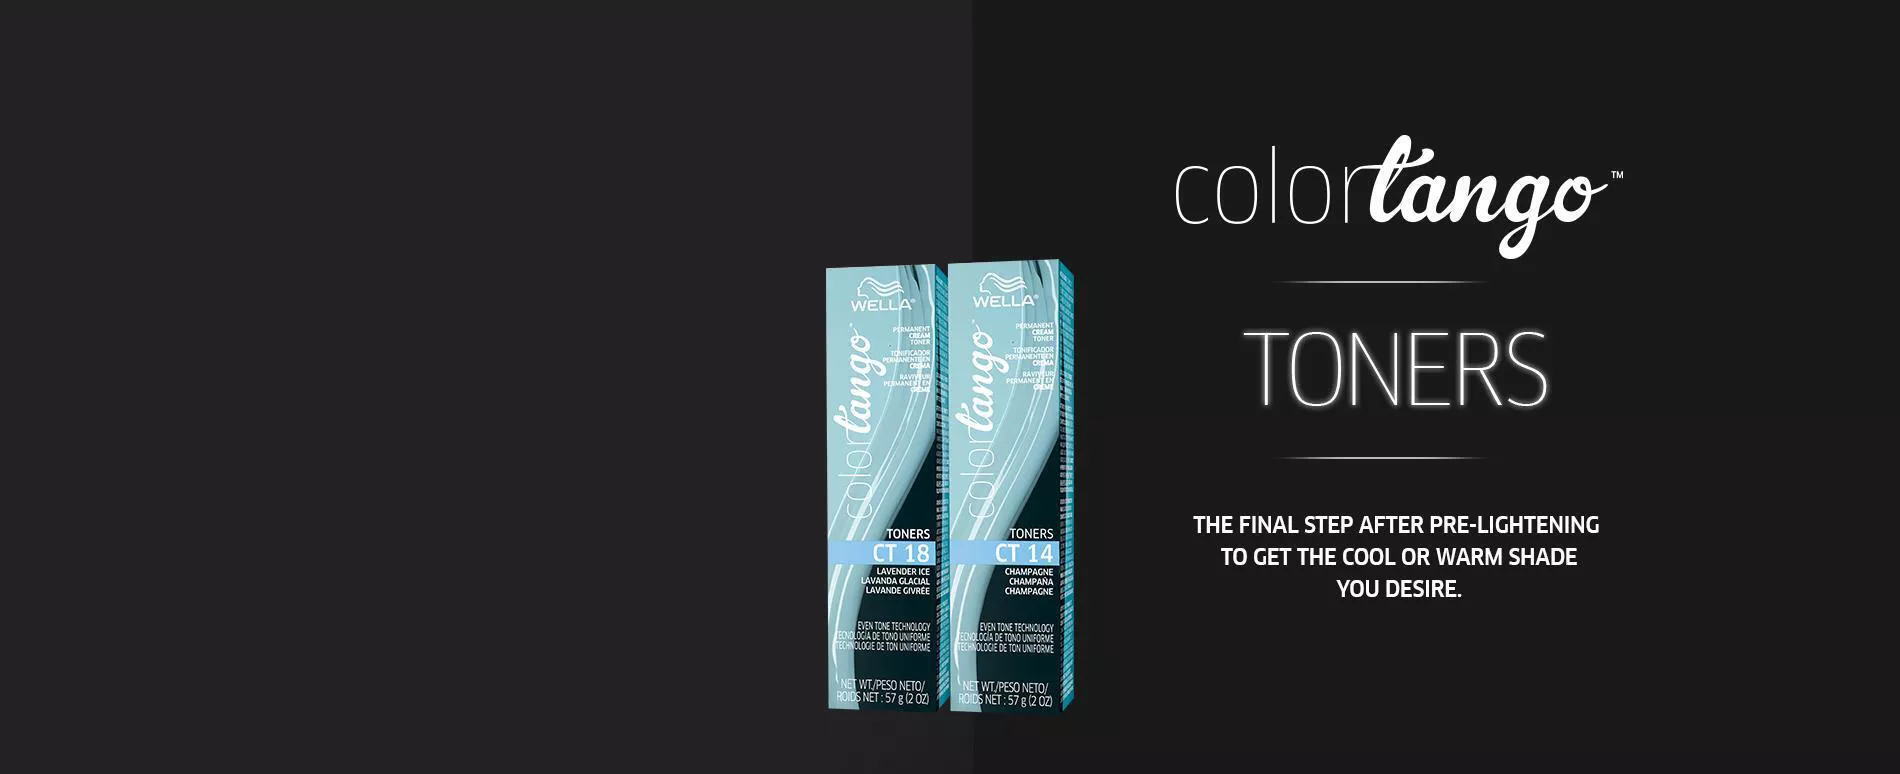 Color Tango Toners Banner